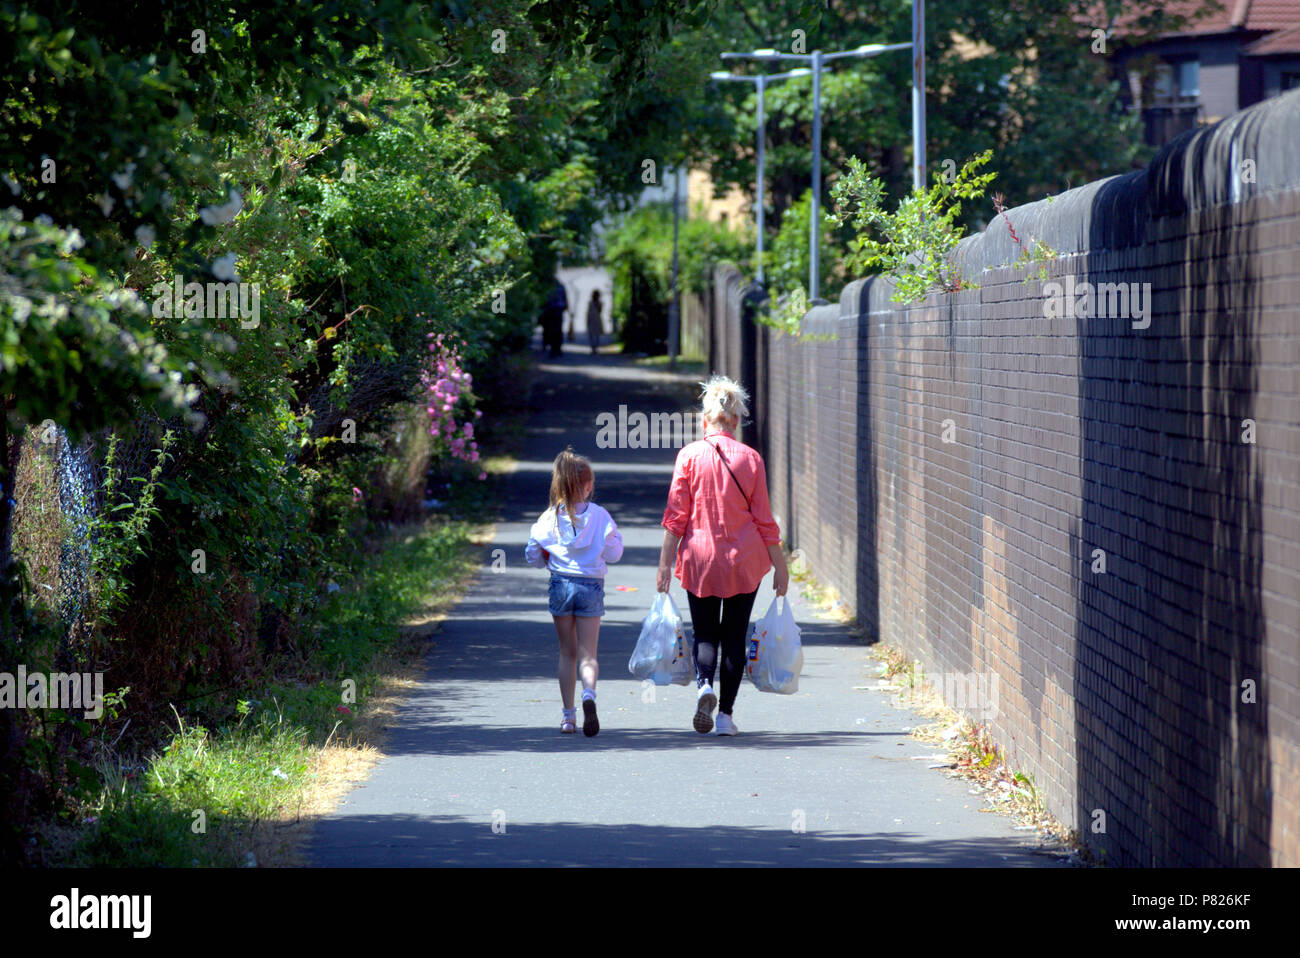 mother and daughter carrying shopping bags walking down a narrow lane sunny shadows people in foreground summer Stock Photo